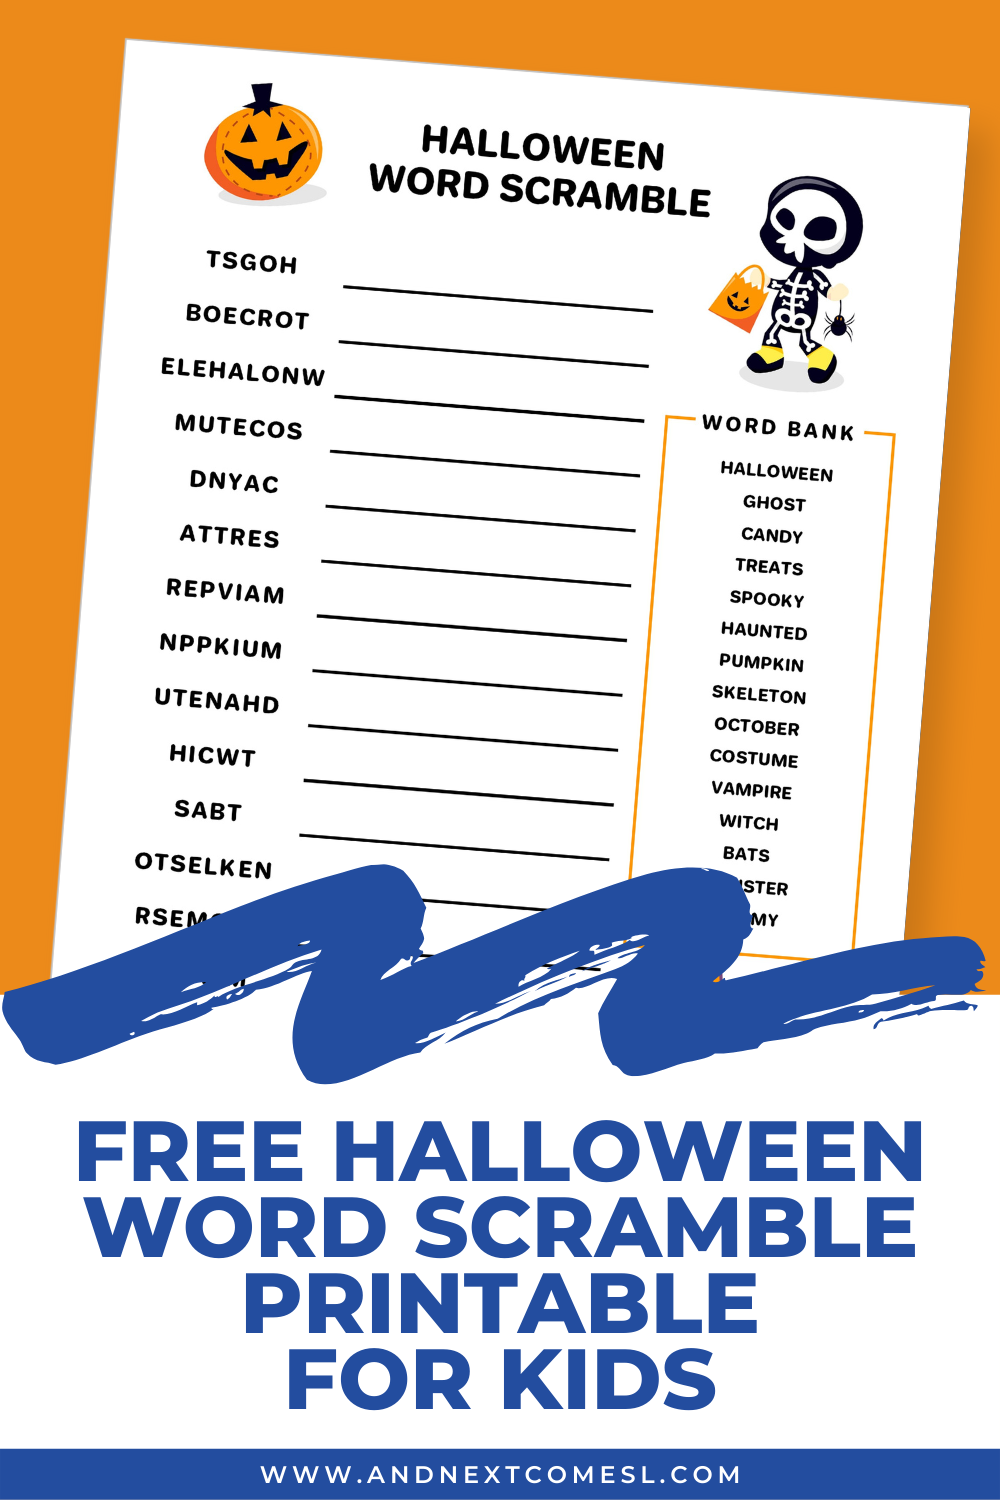 Free printable Halloween word scramble for kids - with answers!